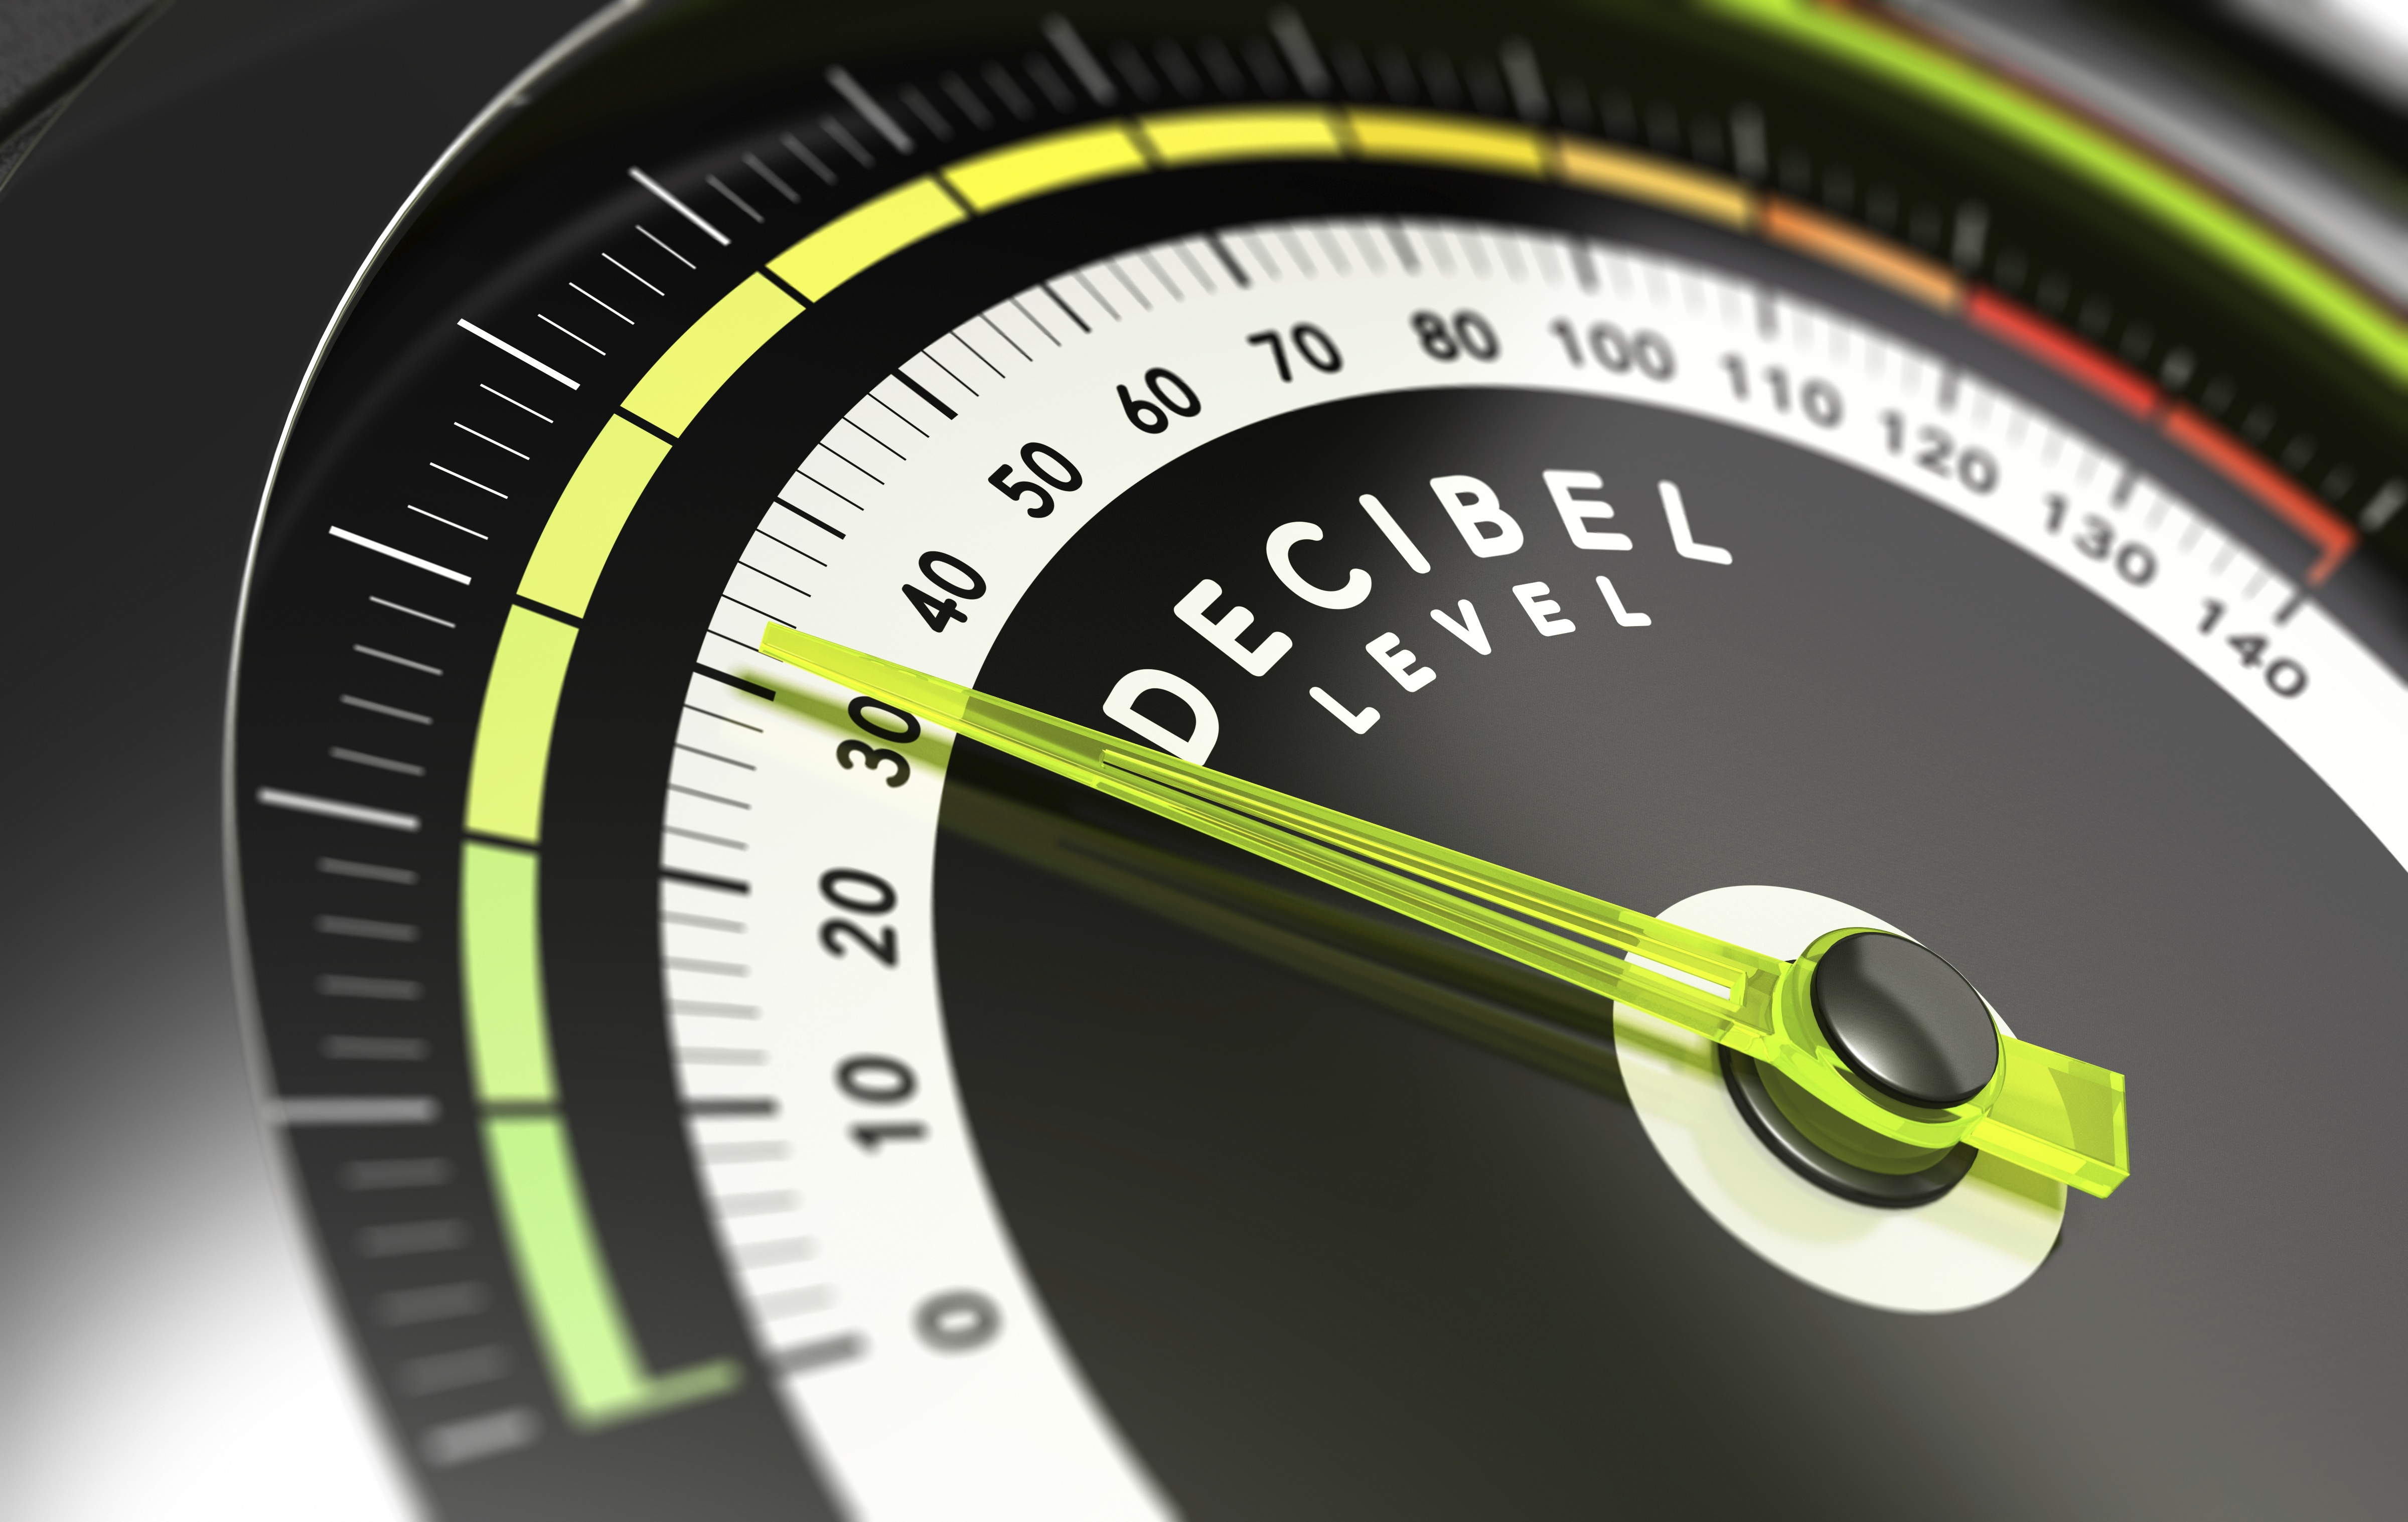 Decibel measurement. Gauge with green needle pointing 30 dB, concept of noise reduction